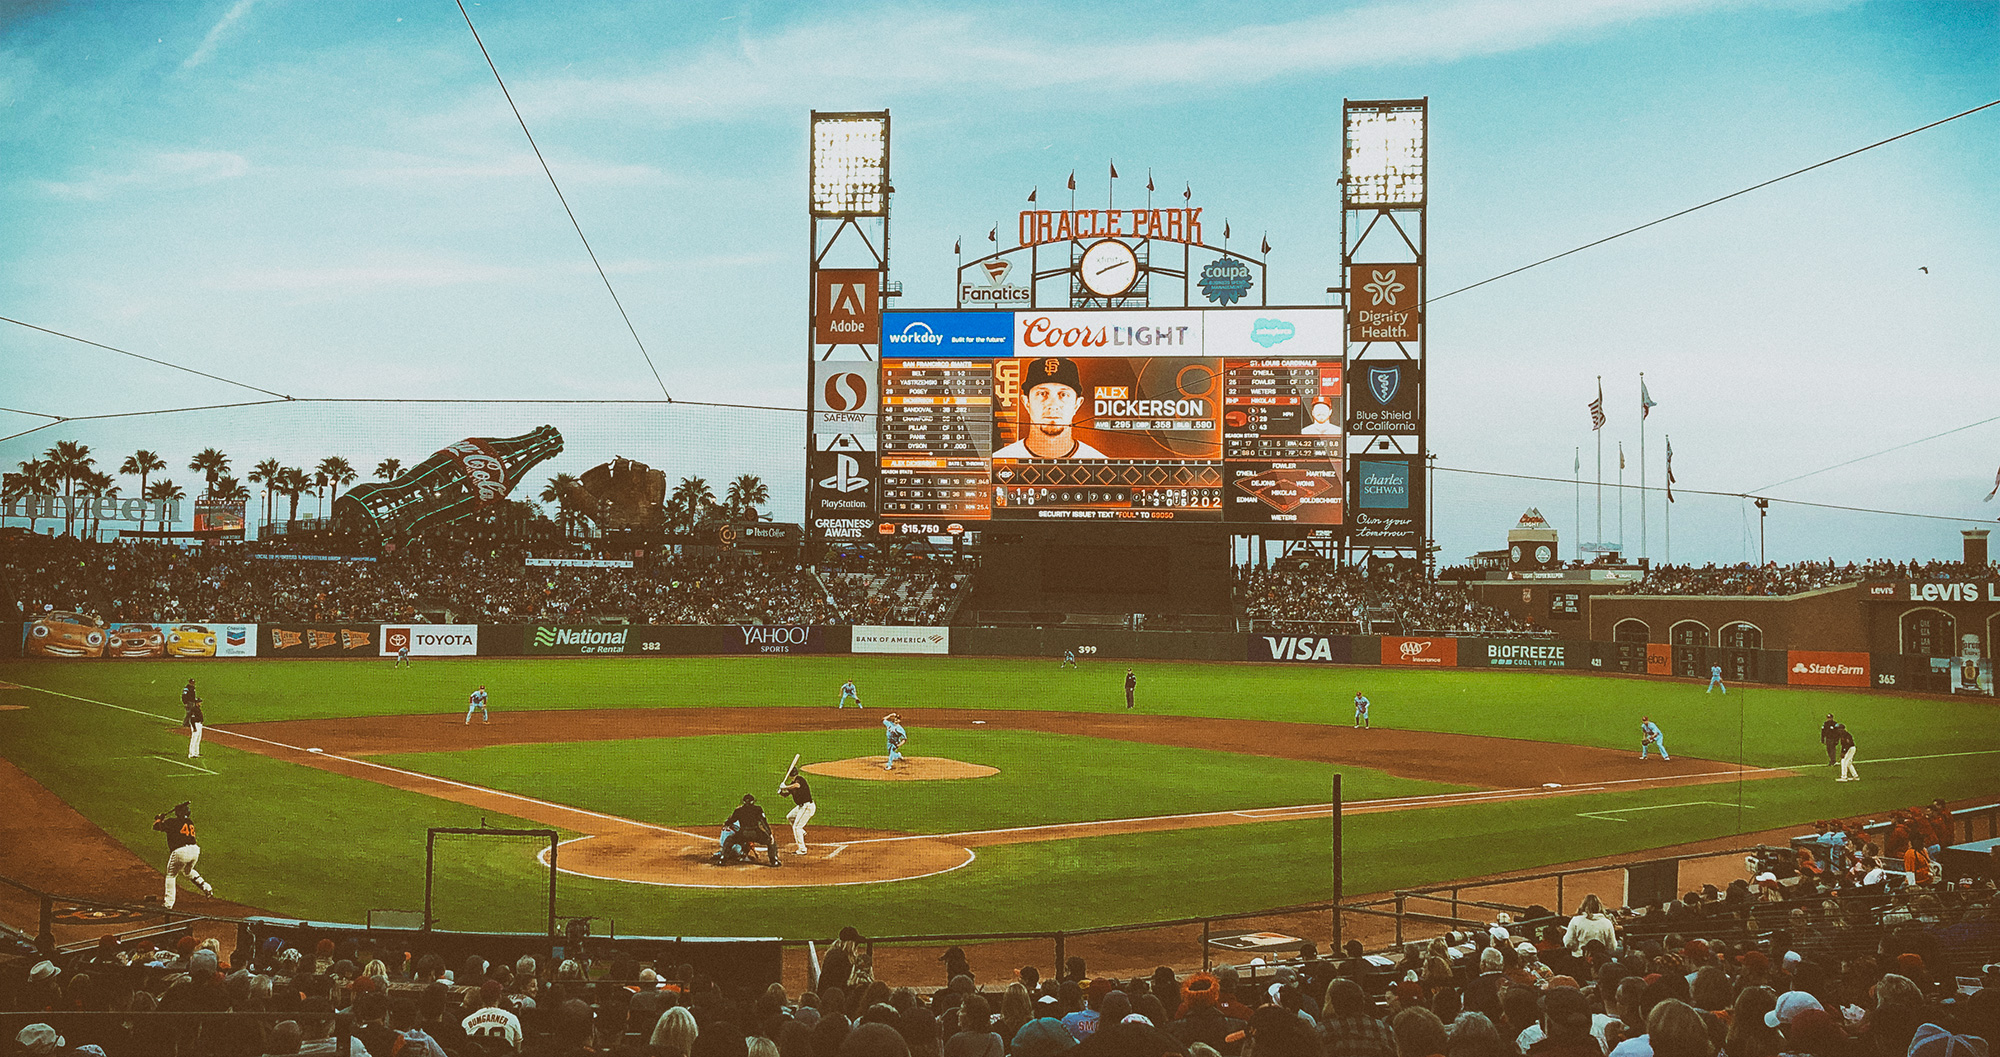 July 6th, 2019 Baseball game between the St. Louis Cardinals and San Francisco Giants at Oracle Park